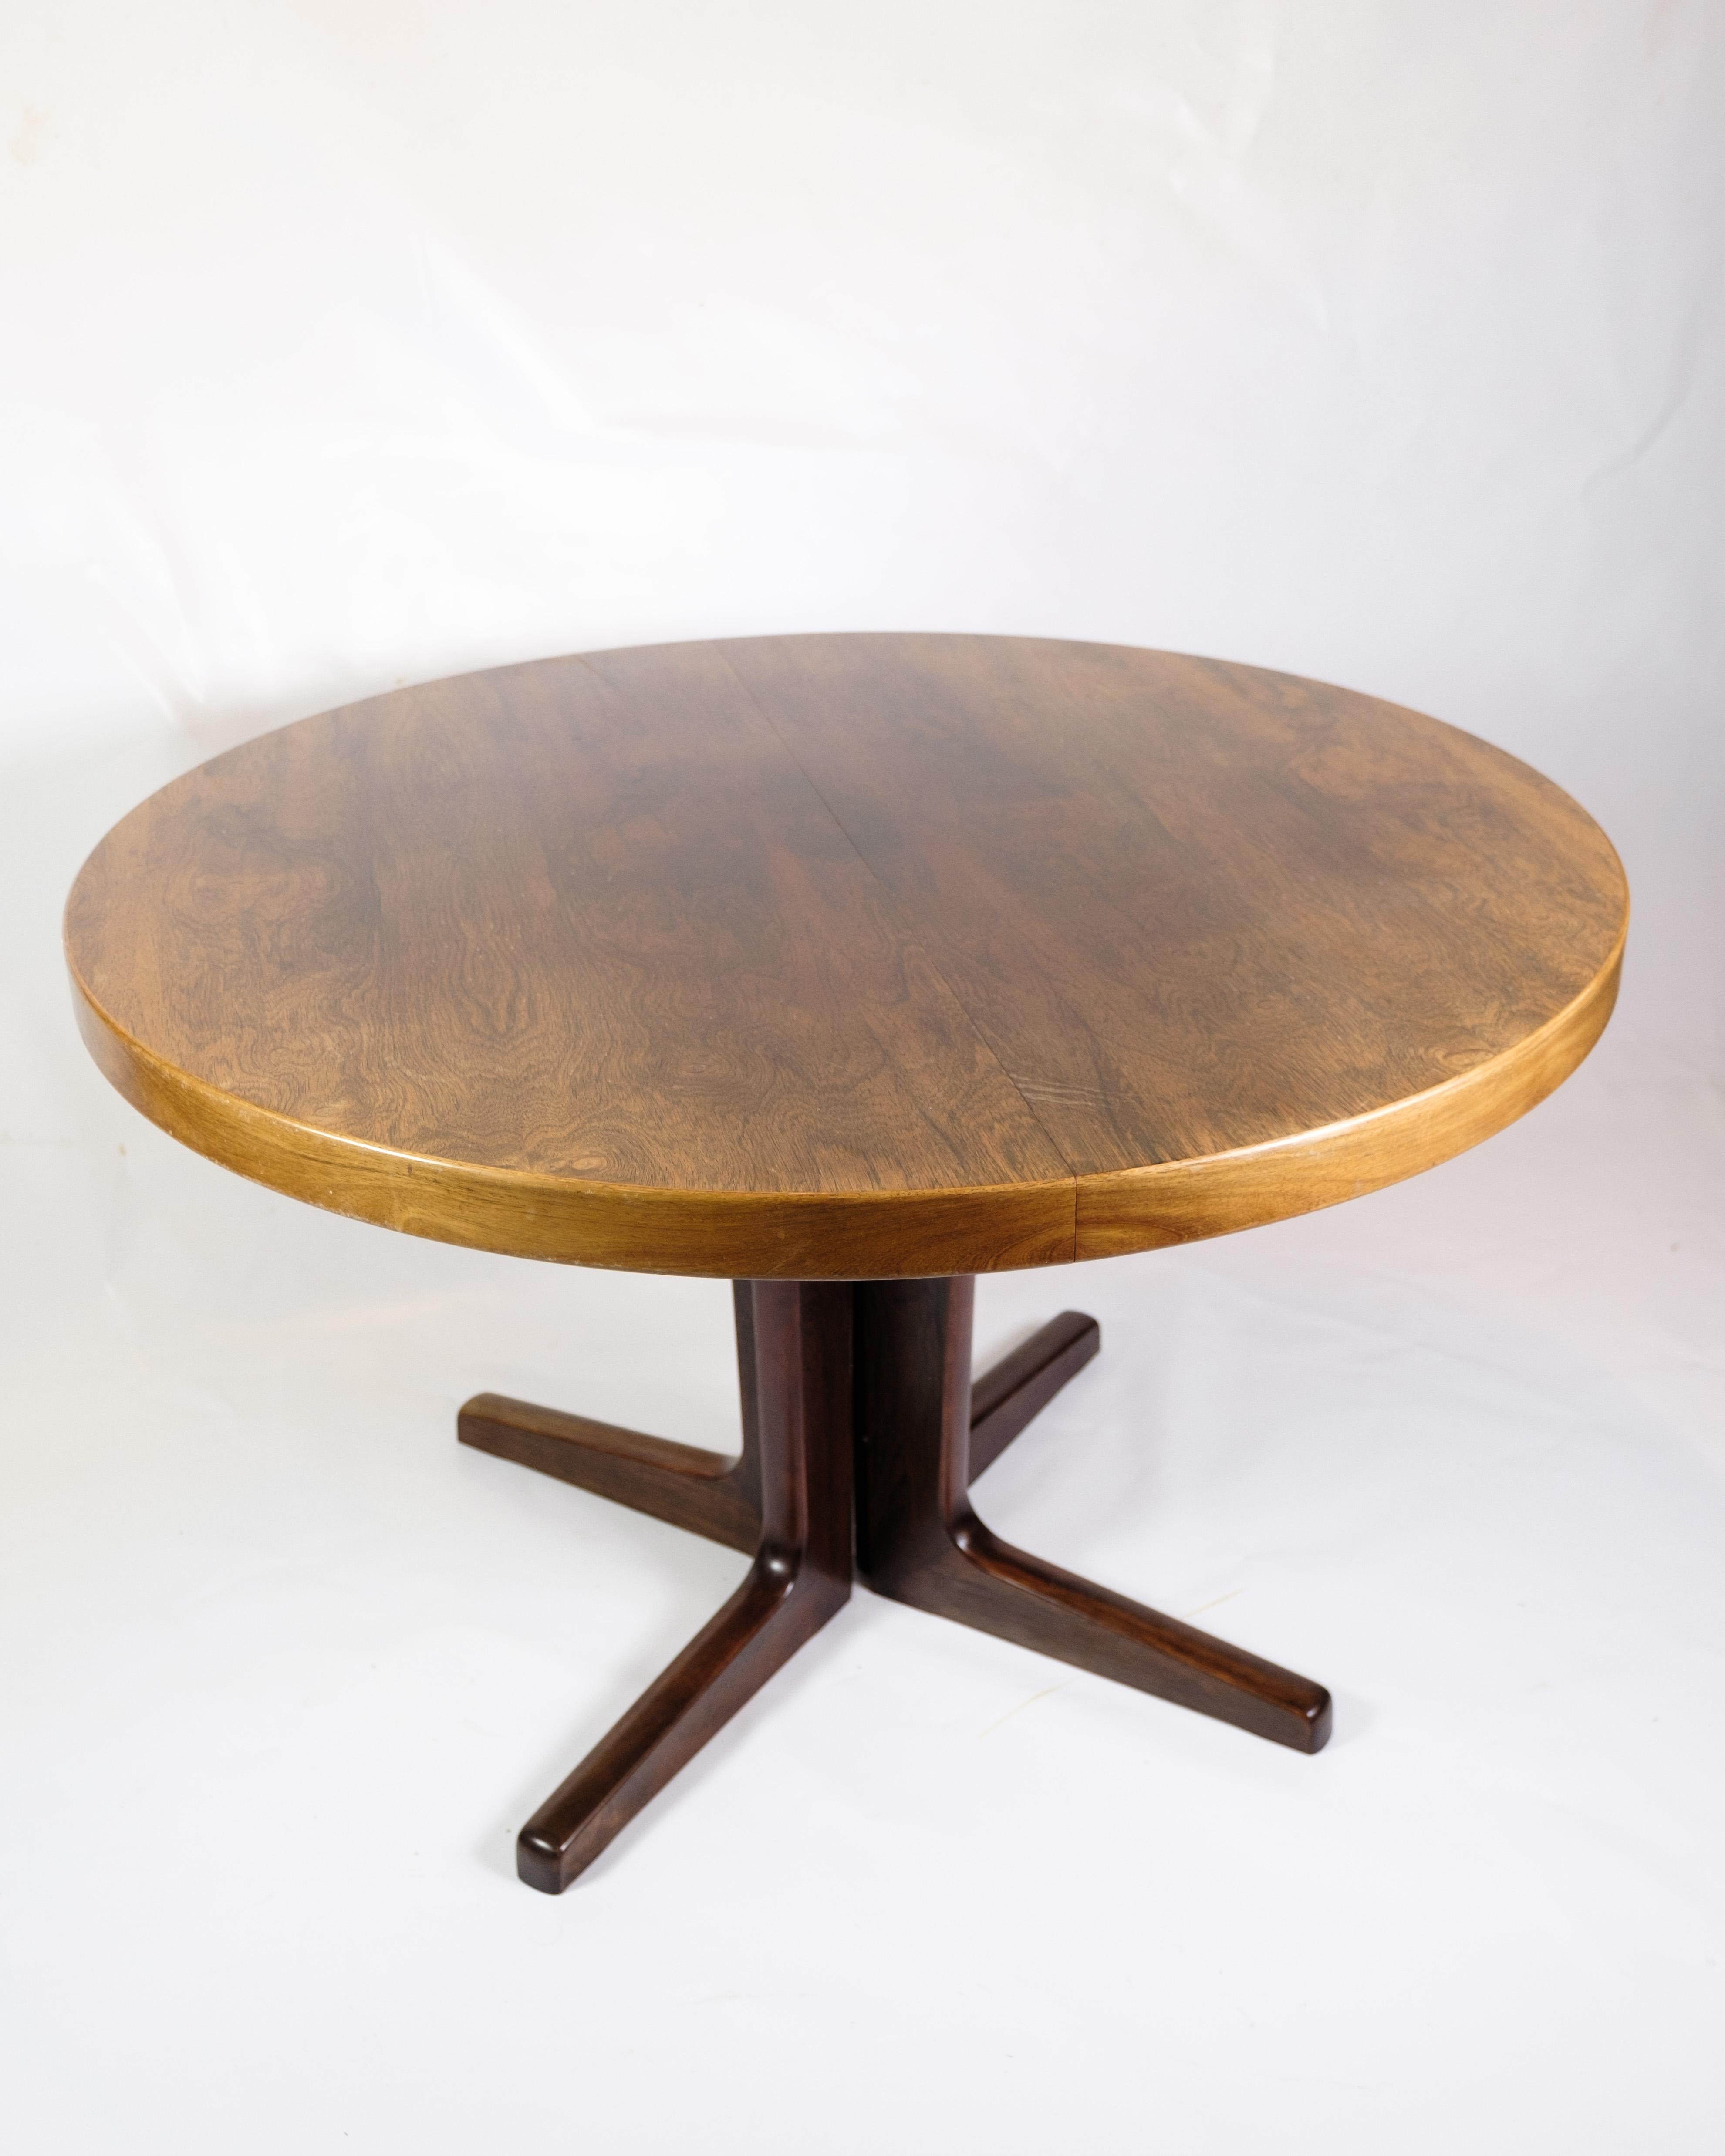 *PRICE INCLUDES FULL REFINISH OF THE ENTIRE ITEM*

This round dining table in rosewood from 1960, produced by Skovby Møbelfabrik, is a splendid example of Danish furniture art and craftsmanship from the mid-20th century. The rosewood, with its warm